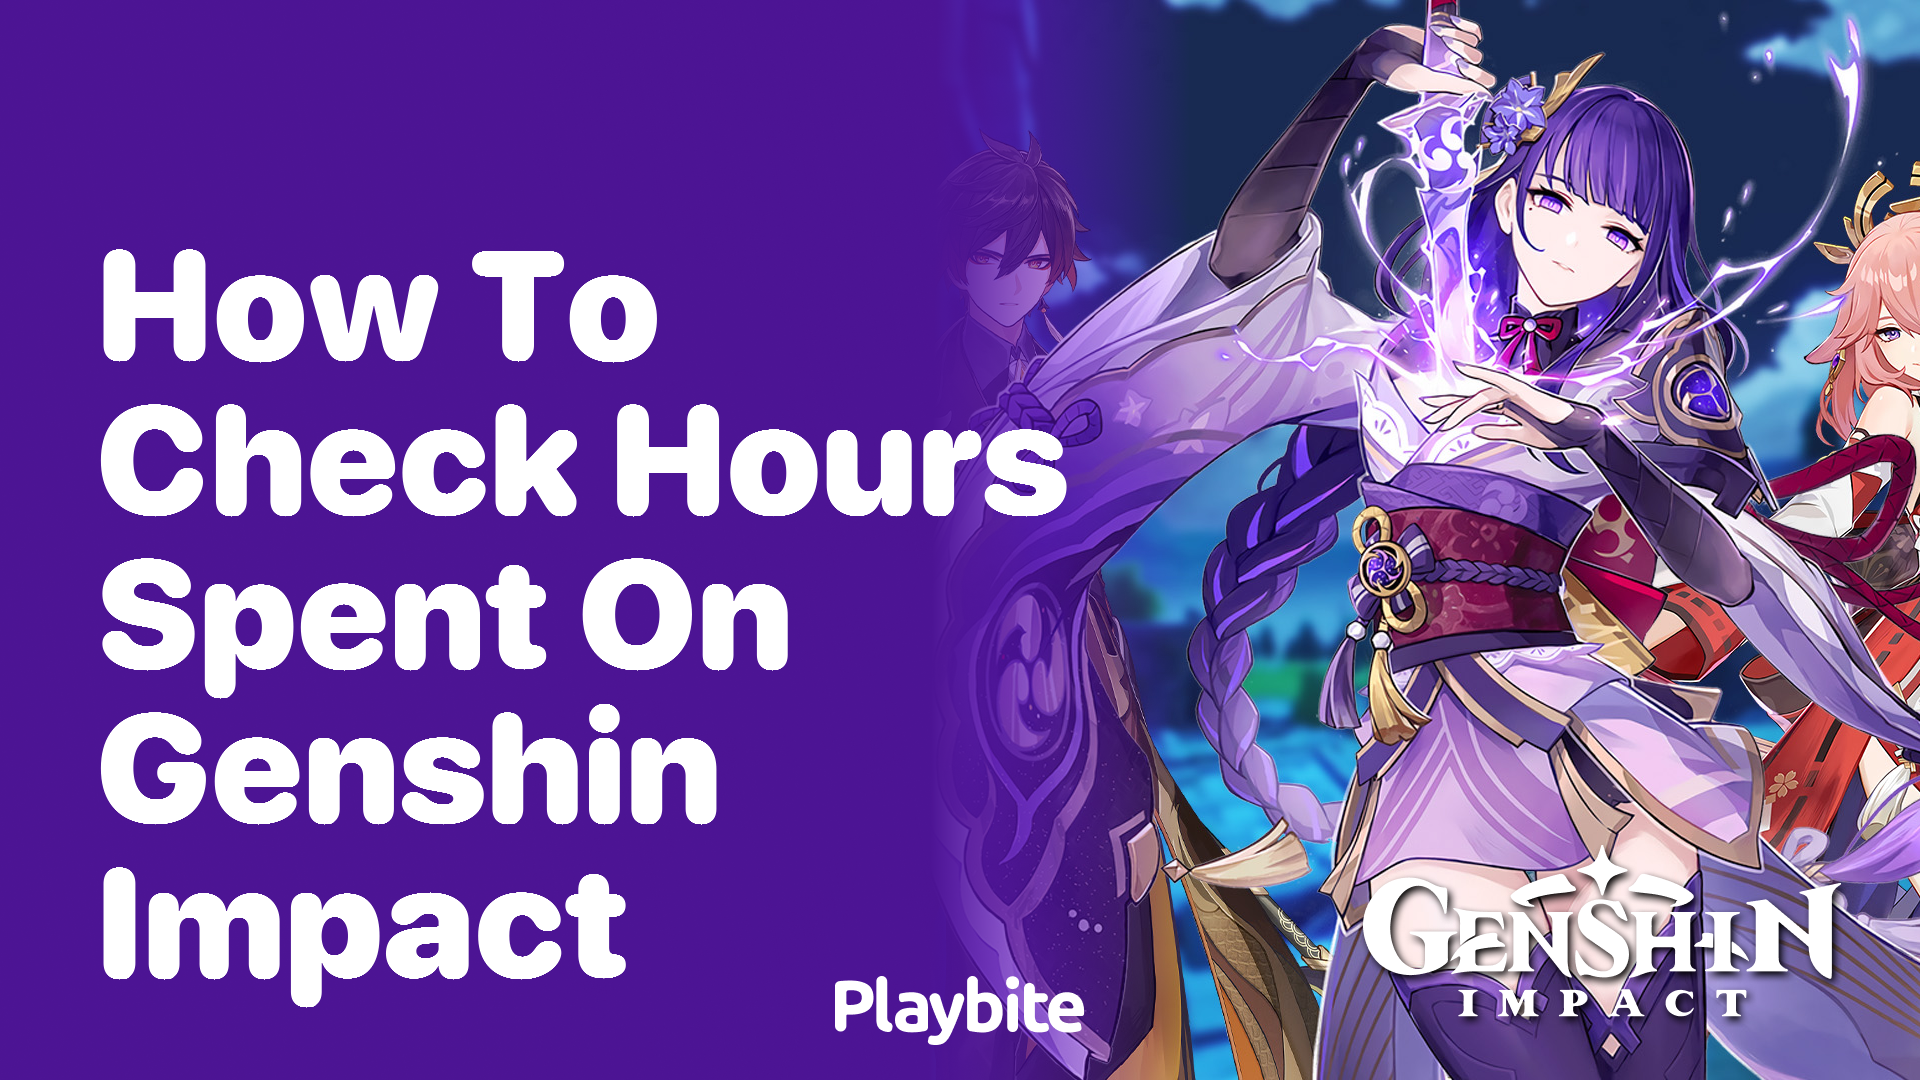 How to Check Hours Spent on Genshin Impact